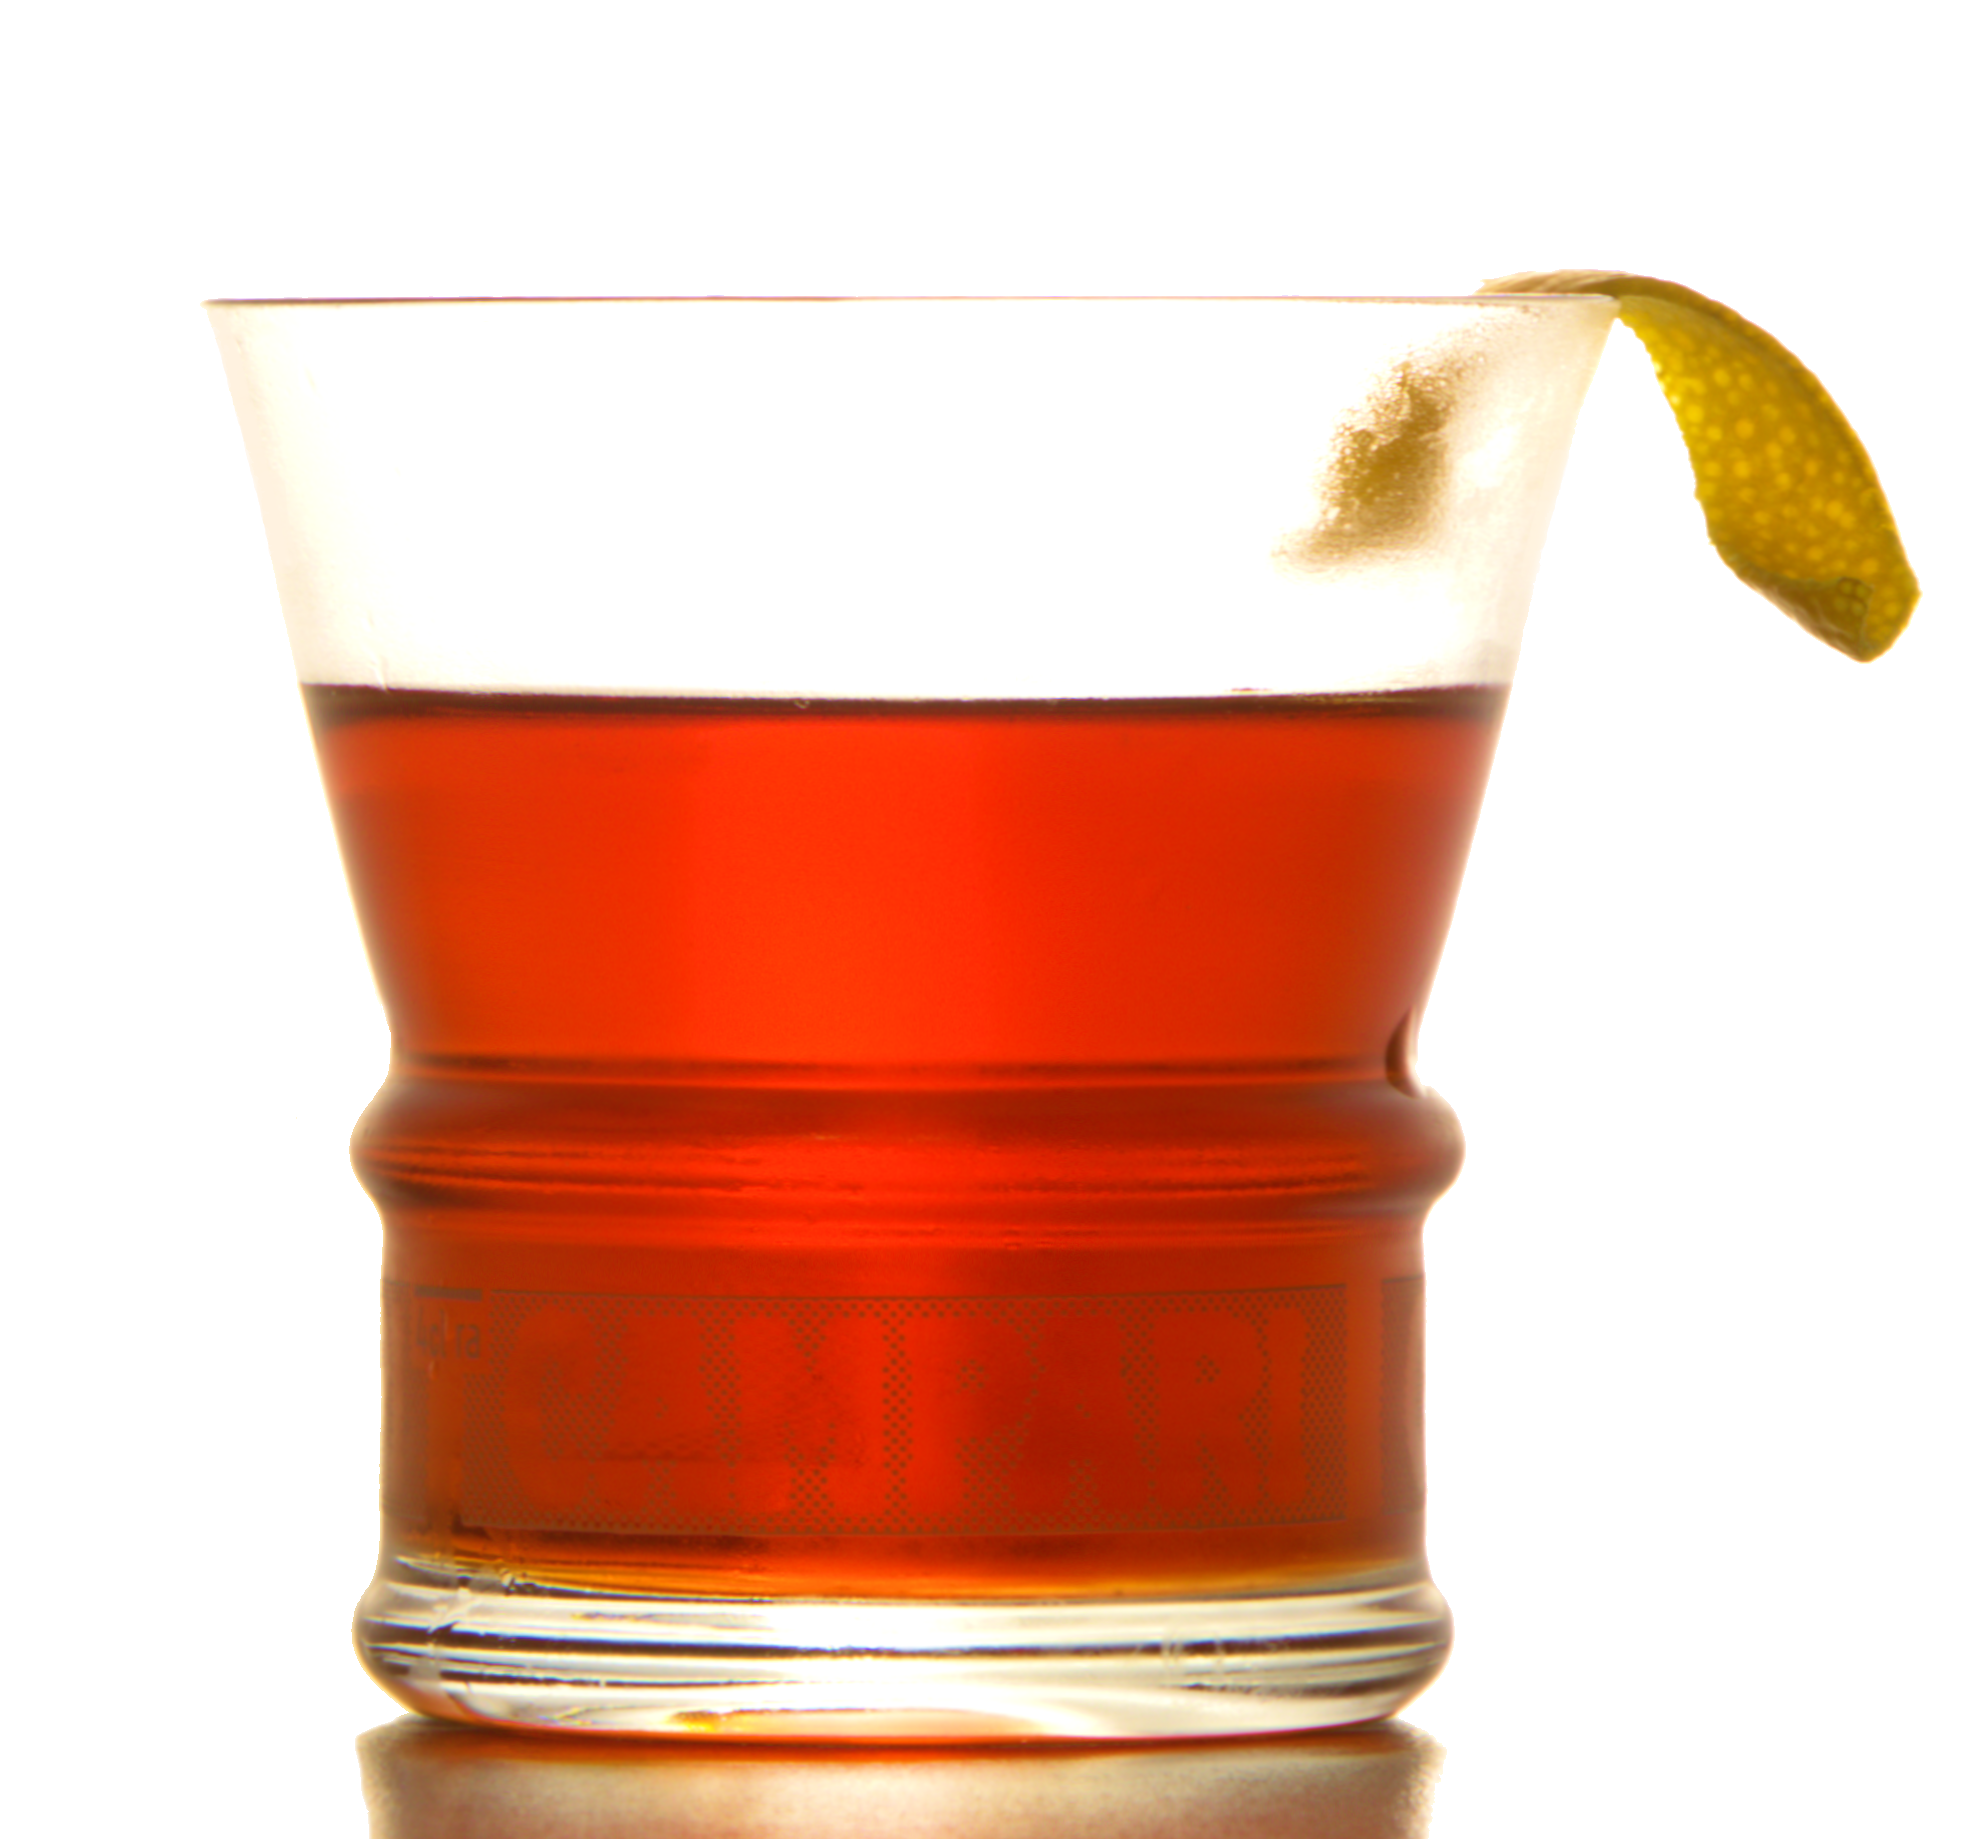 File Negroni Cocktail Transparent Background Png Wikimedia Commons